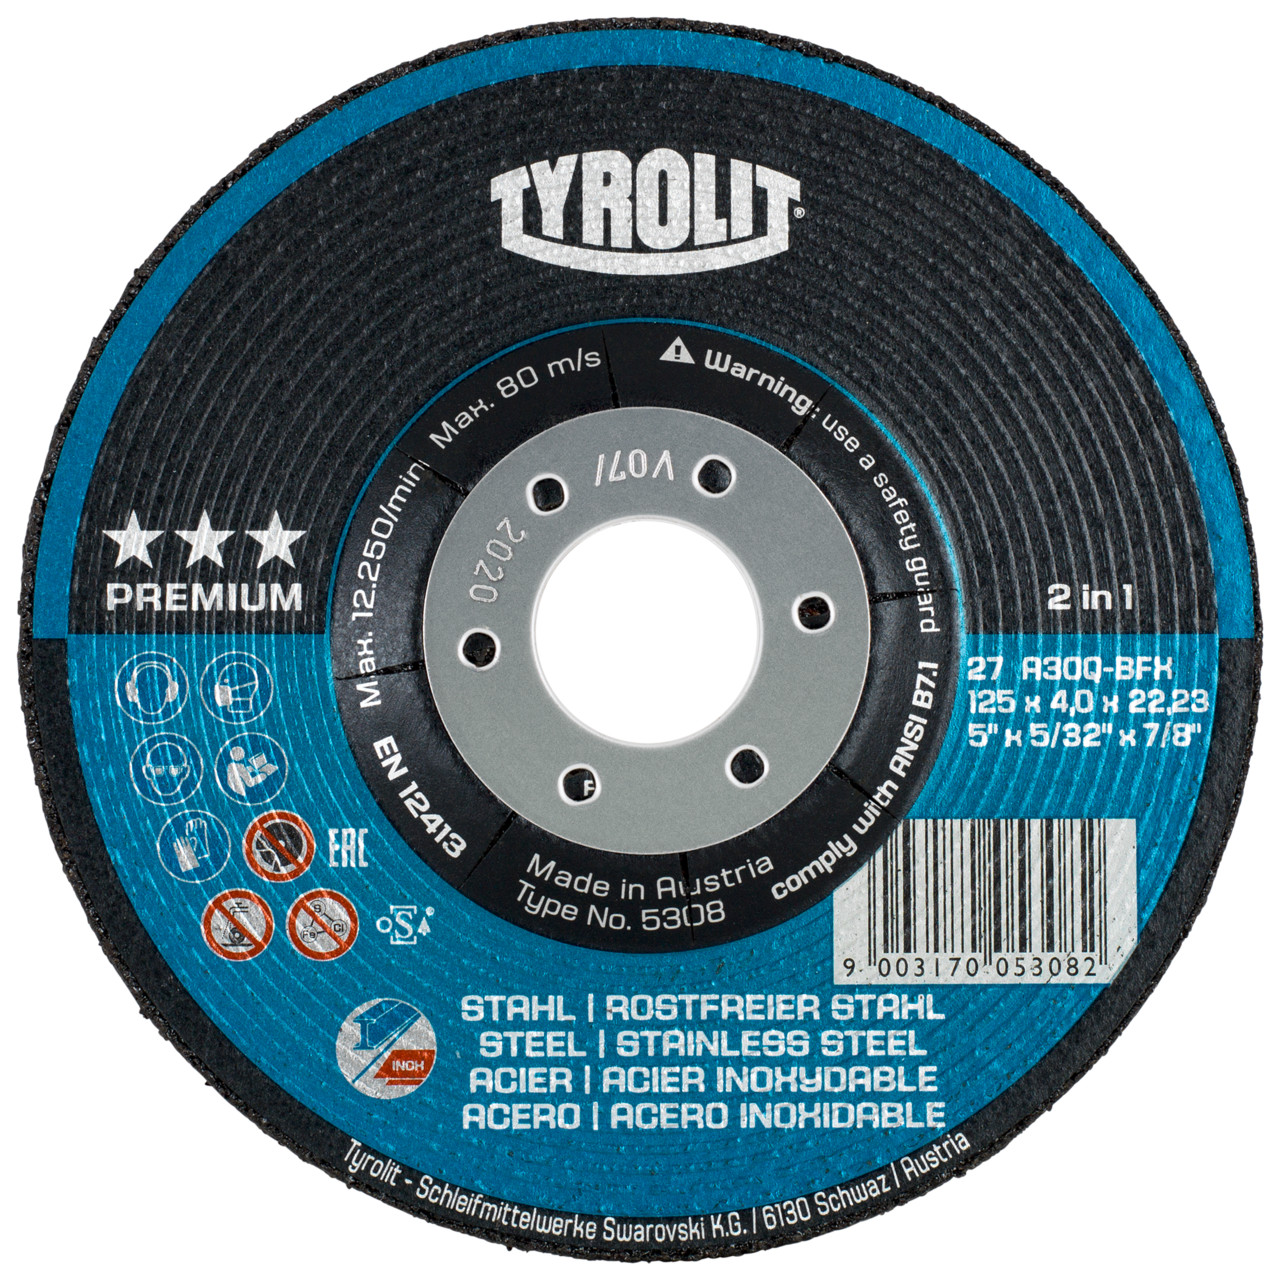 TYROLIT grinding wheel DxUxH 178x8x22.23 2in1 for steel and stainless steel, shape: 27 - offset version, Art. 34046135